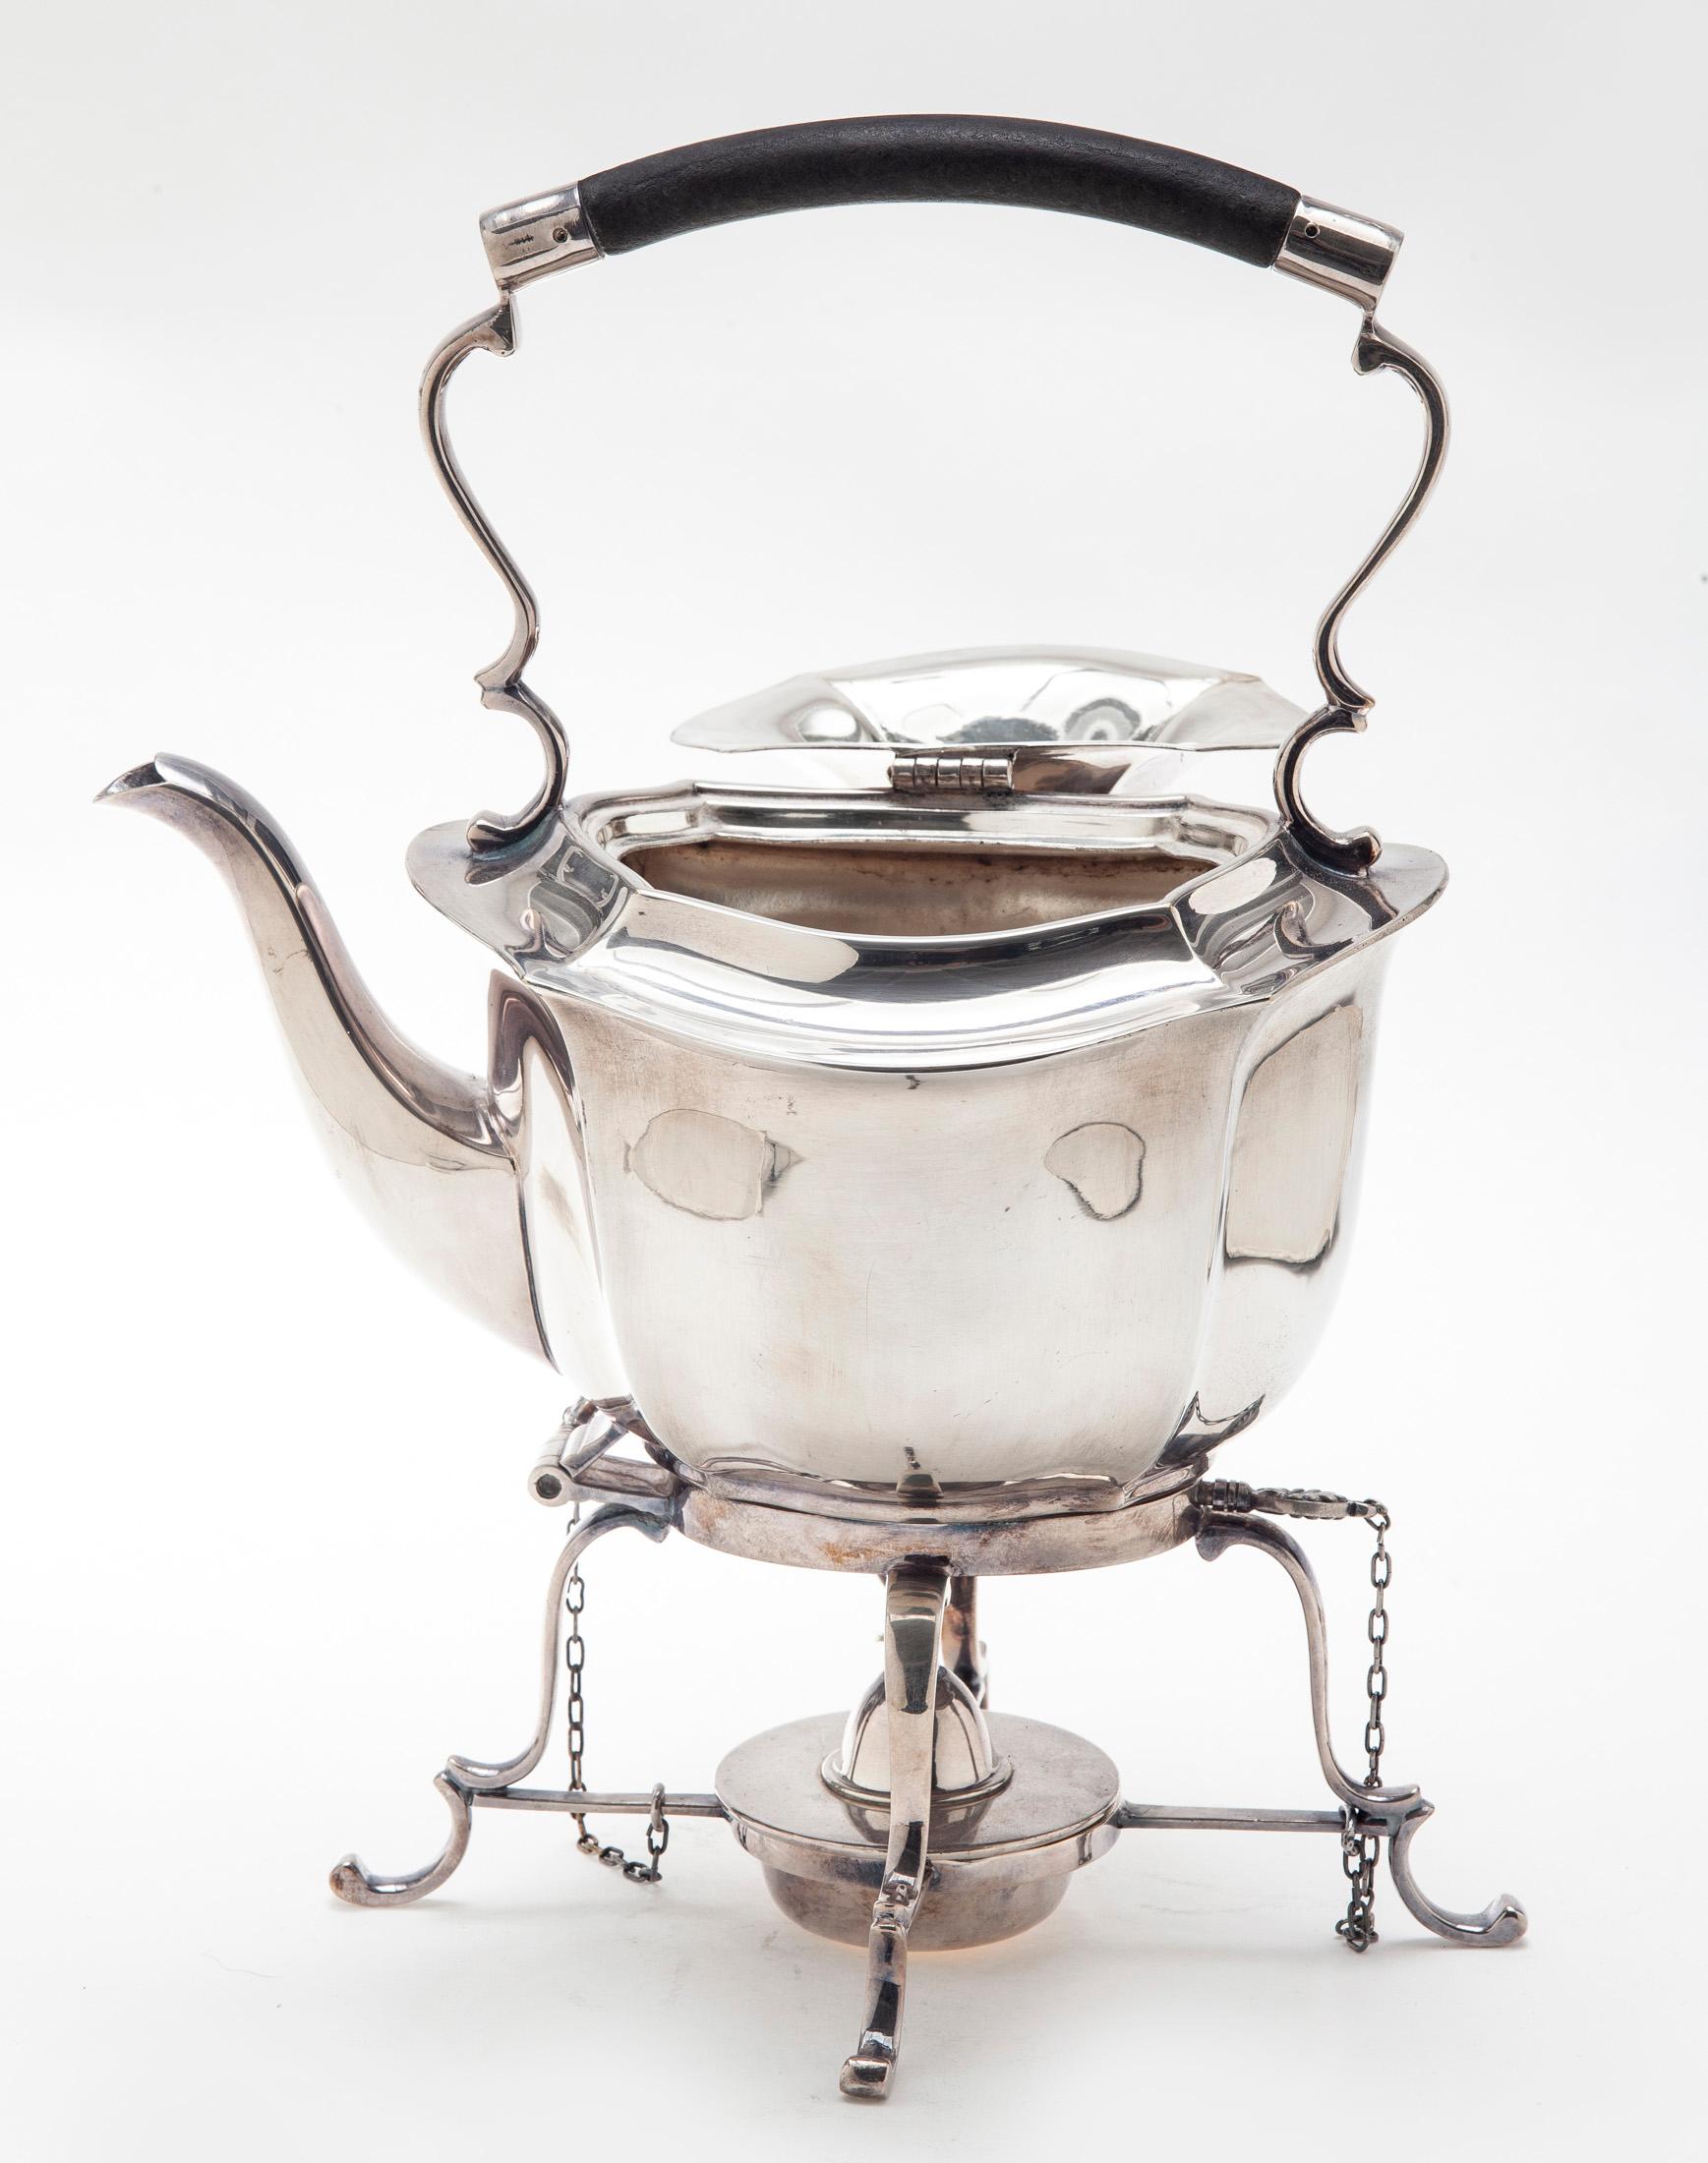 An exceptional example of an antique Sheffield English silver plate teapot on a warming stand in pristine condition.
This elegant teapot is simple & unembellished. It is fitted with a flush hinged top which retains the original ebony wood handle &